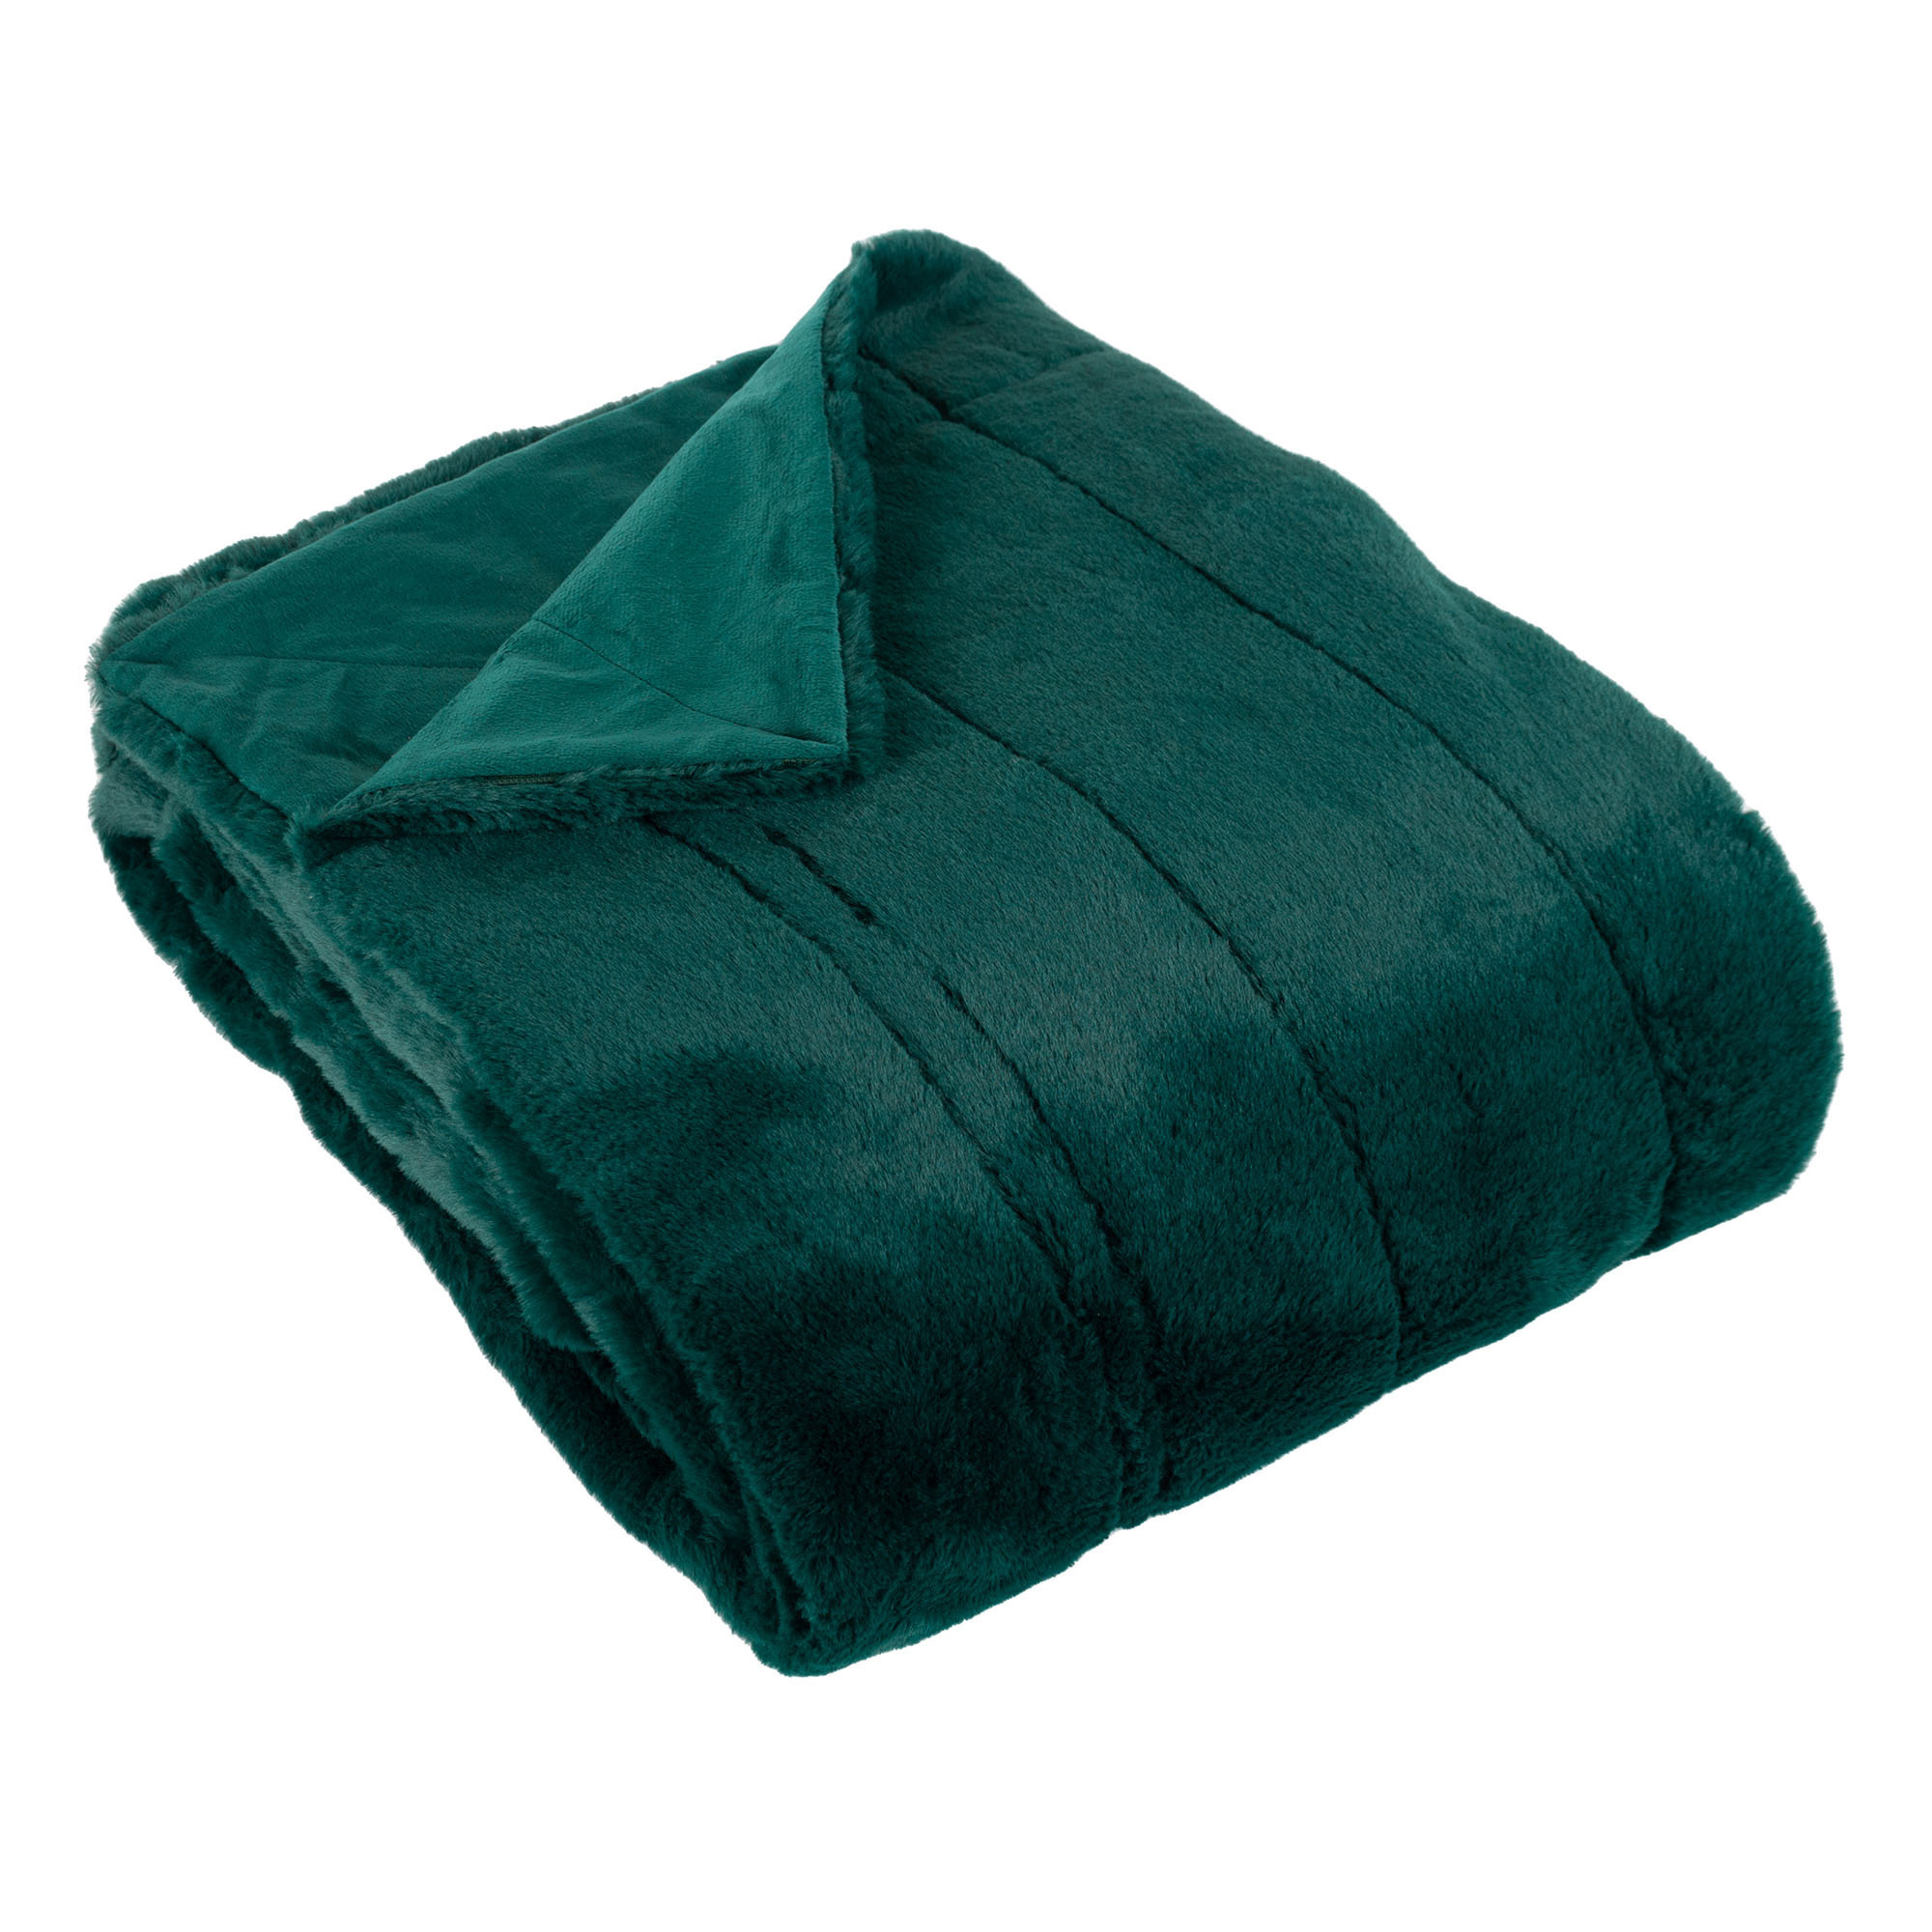 Emerald Faux Fur Throw Blanket, Green Polyester - Barker & Stonehouse - image 1